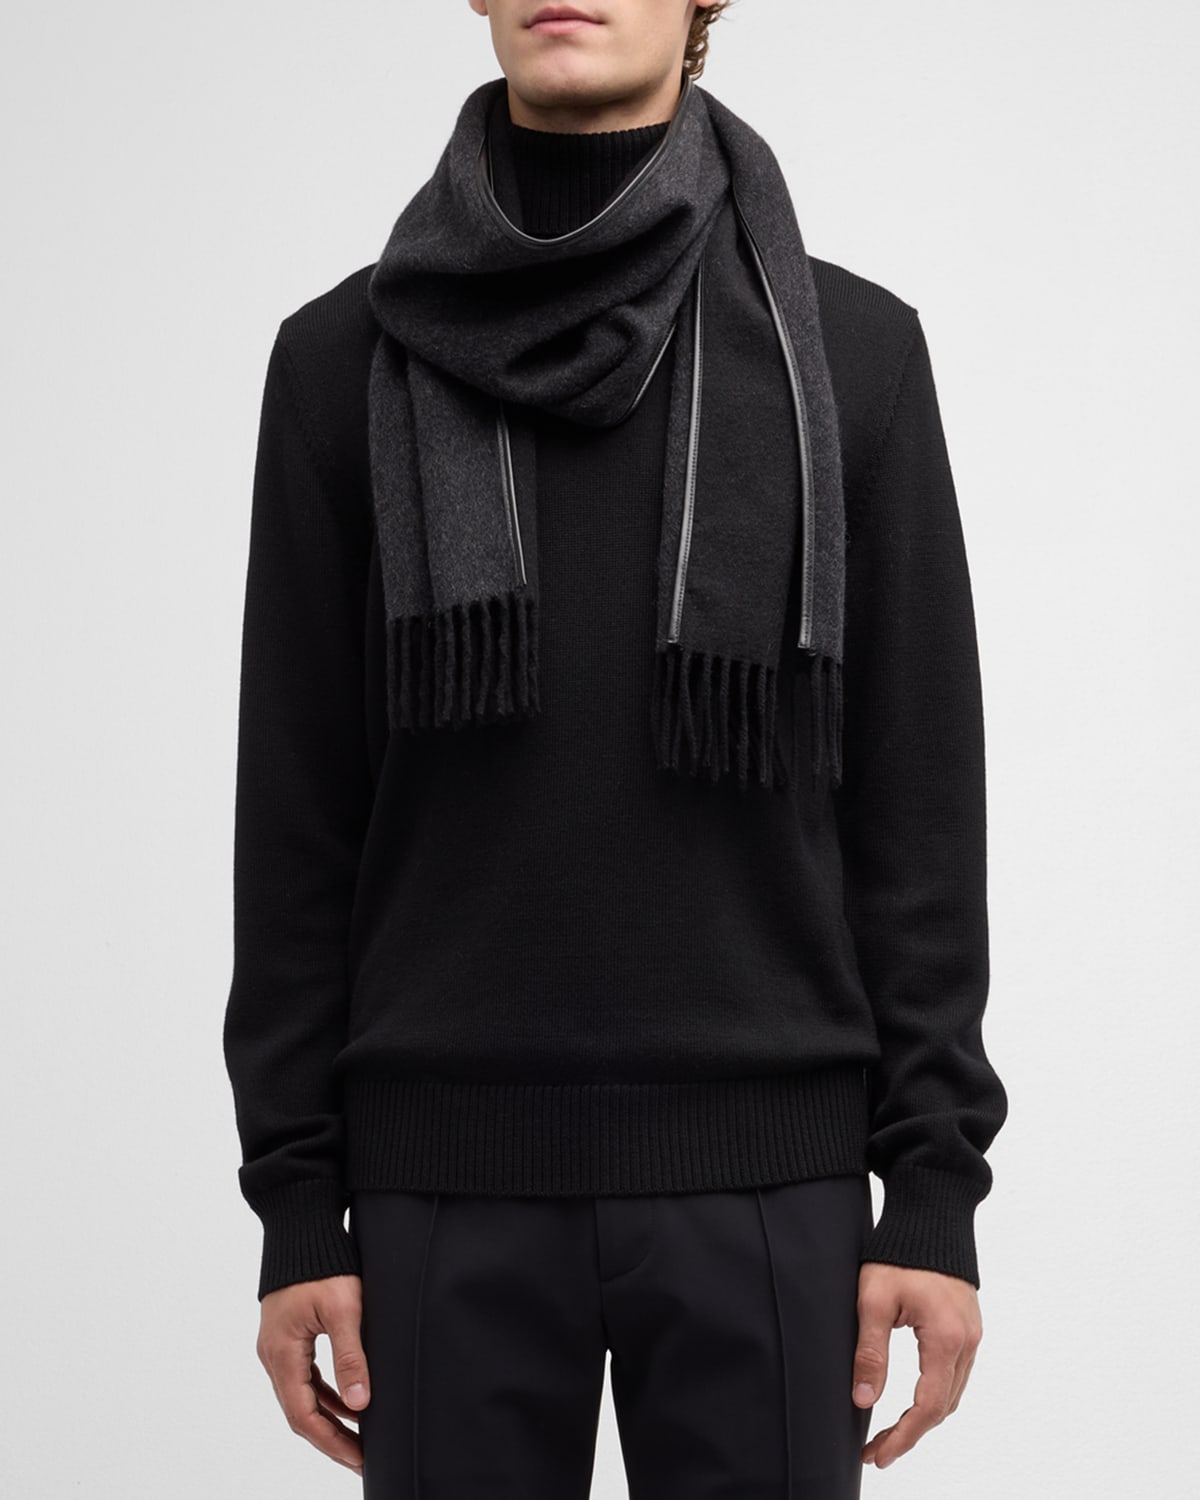 Unisex Cashmere Scarf with Leather Piping